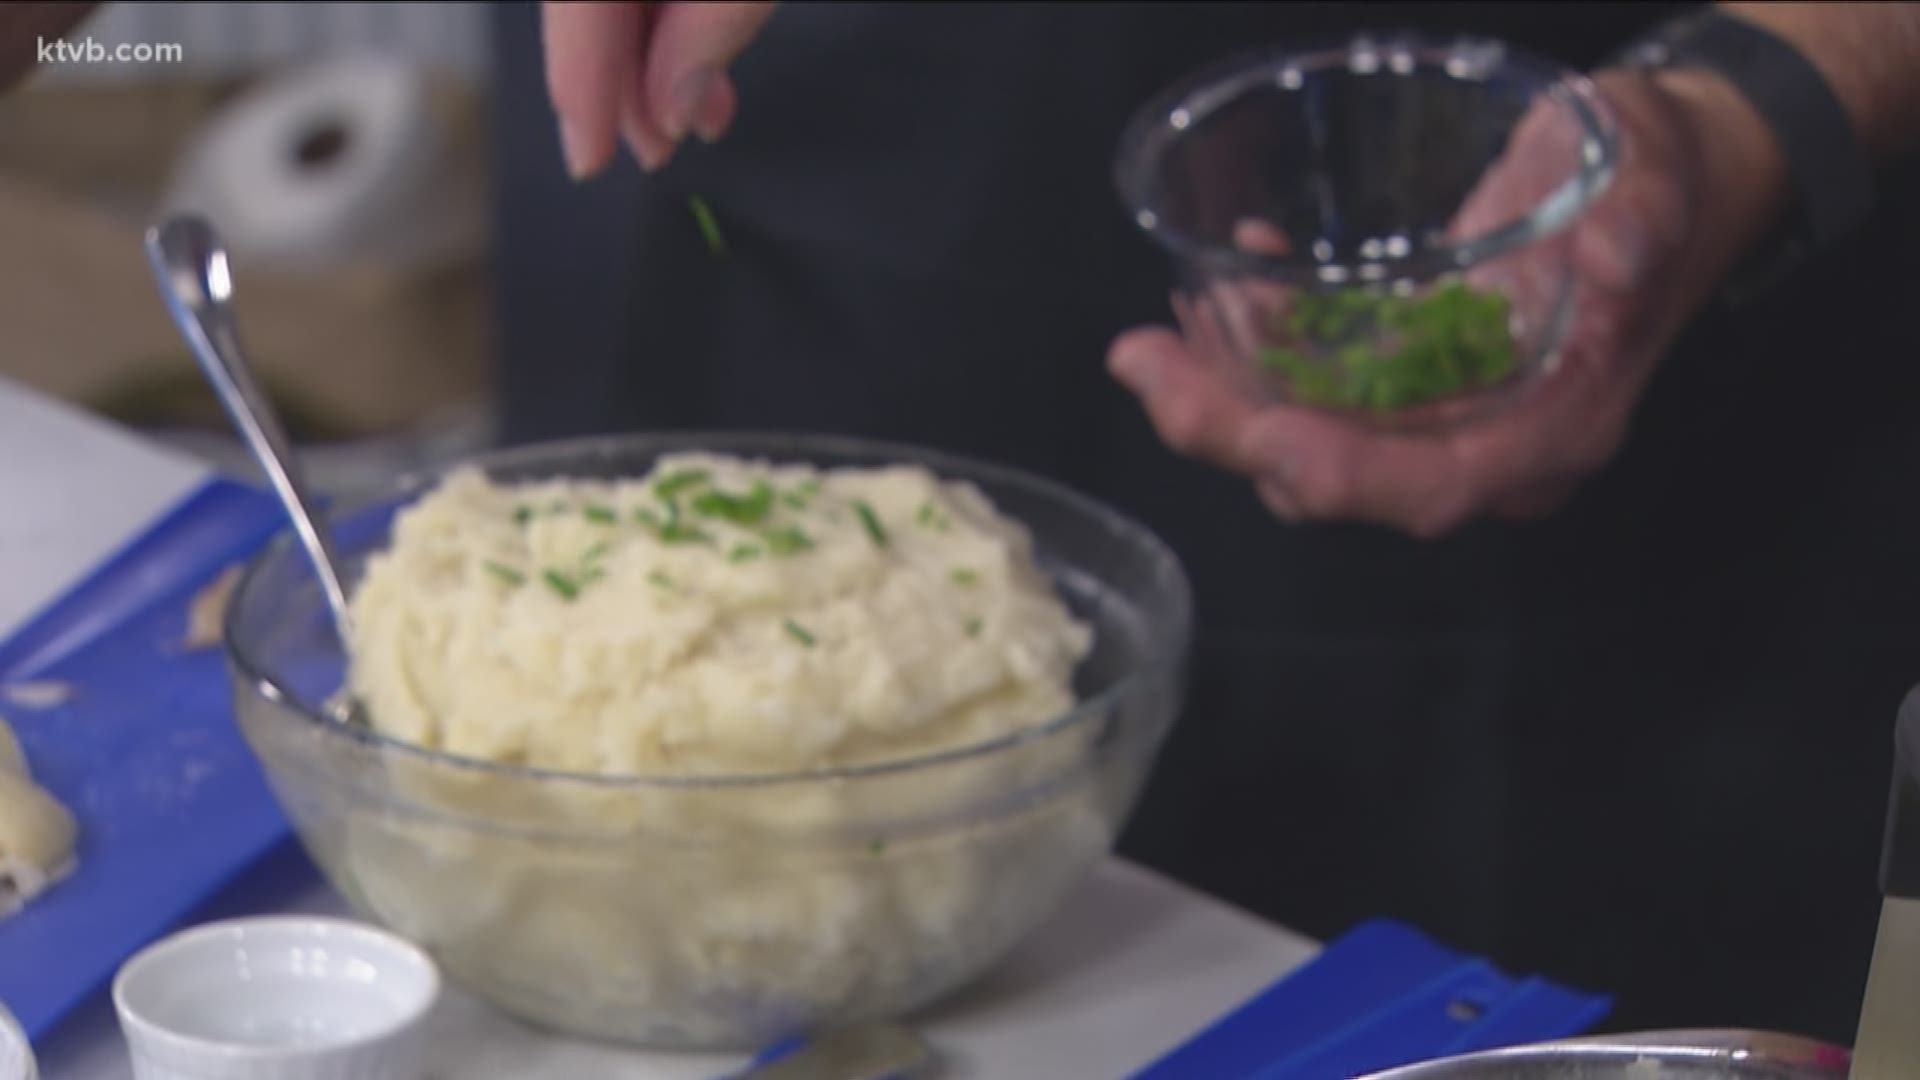 Idaho Potato Commission President Frank Muir shows us how to create tasty mashed potatoes using a secret ingredient.